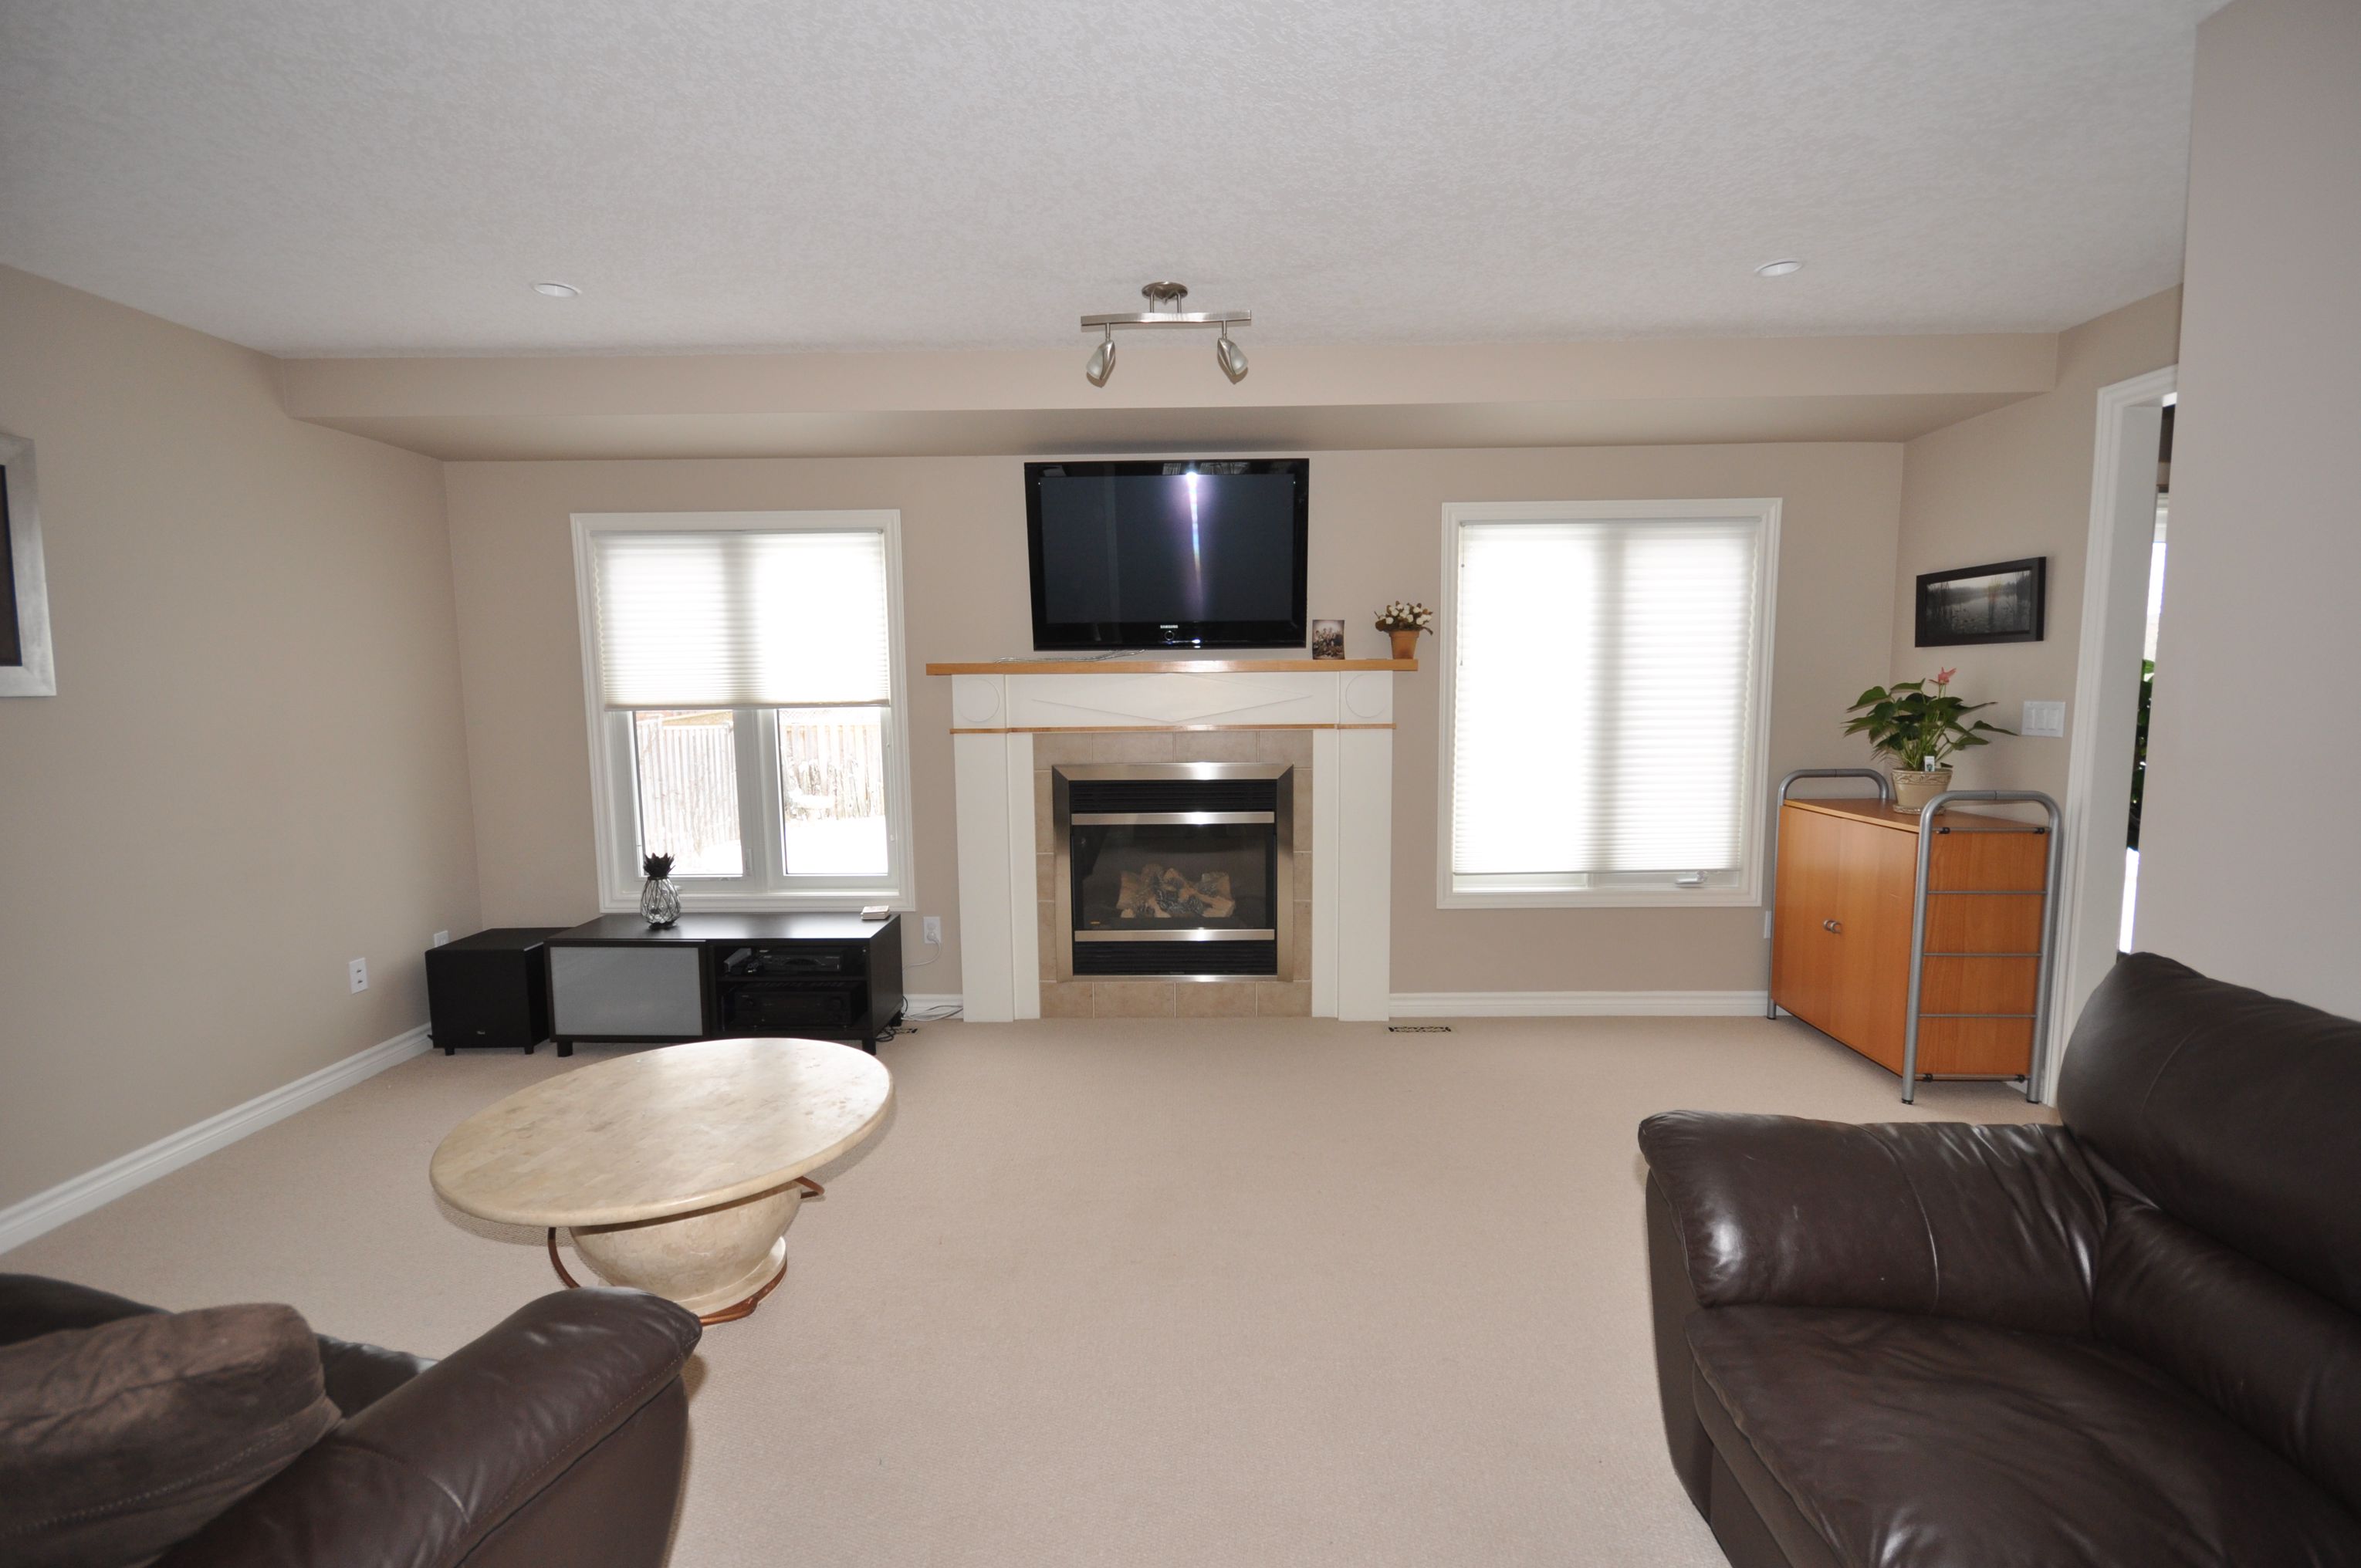 Spacious great room with gas fireplace & bright sunny windows